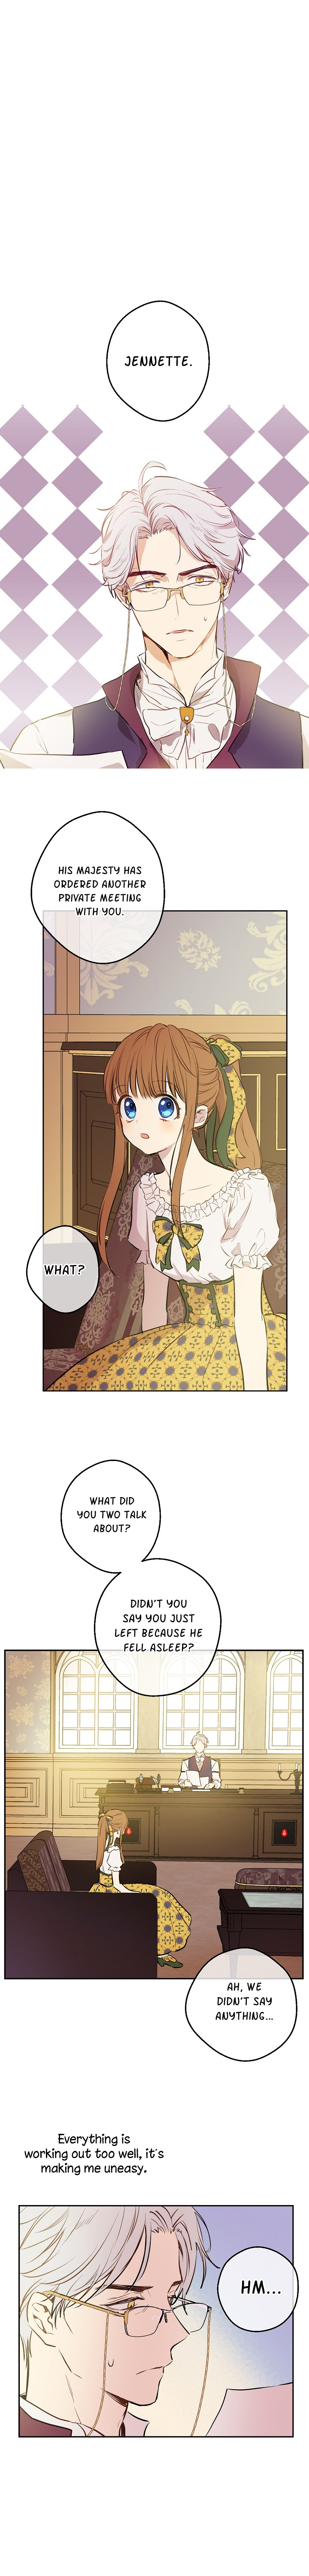 Suddenly Became A Princess One Day ch.62